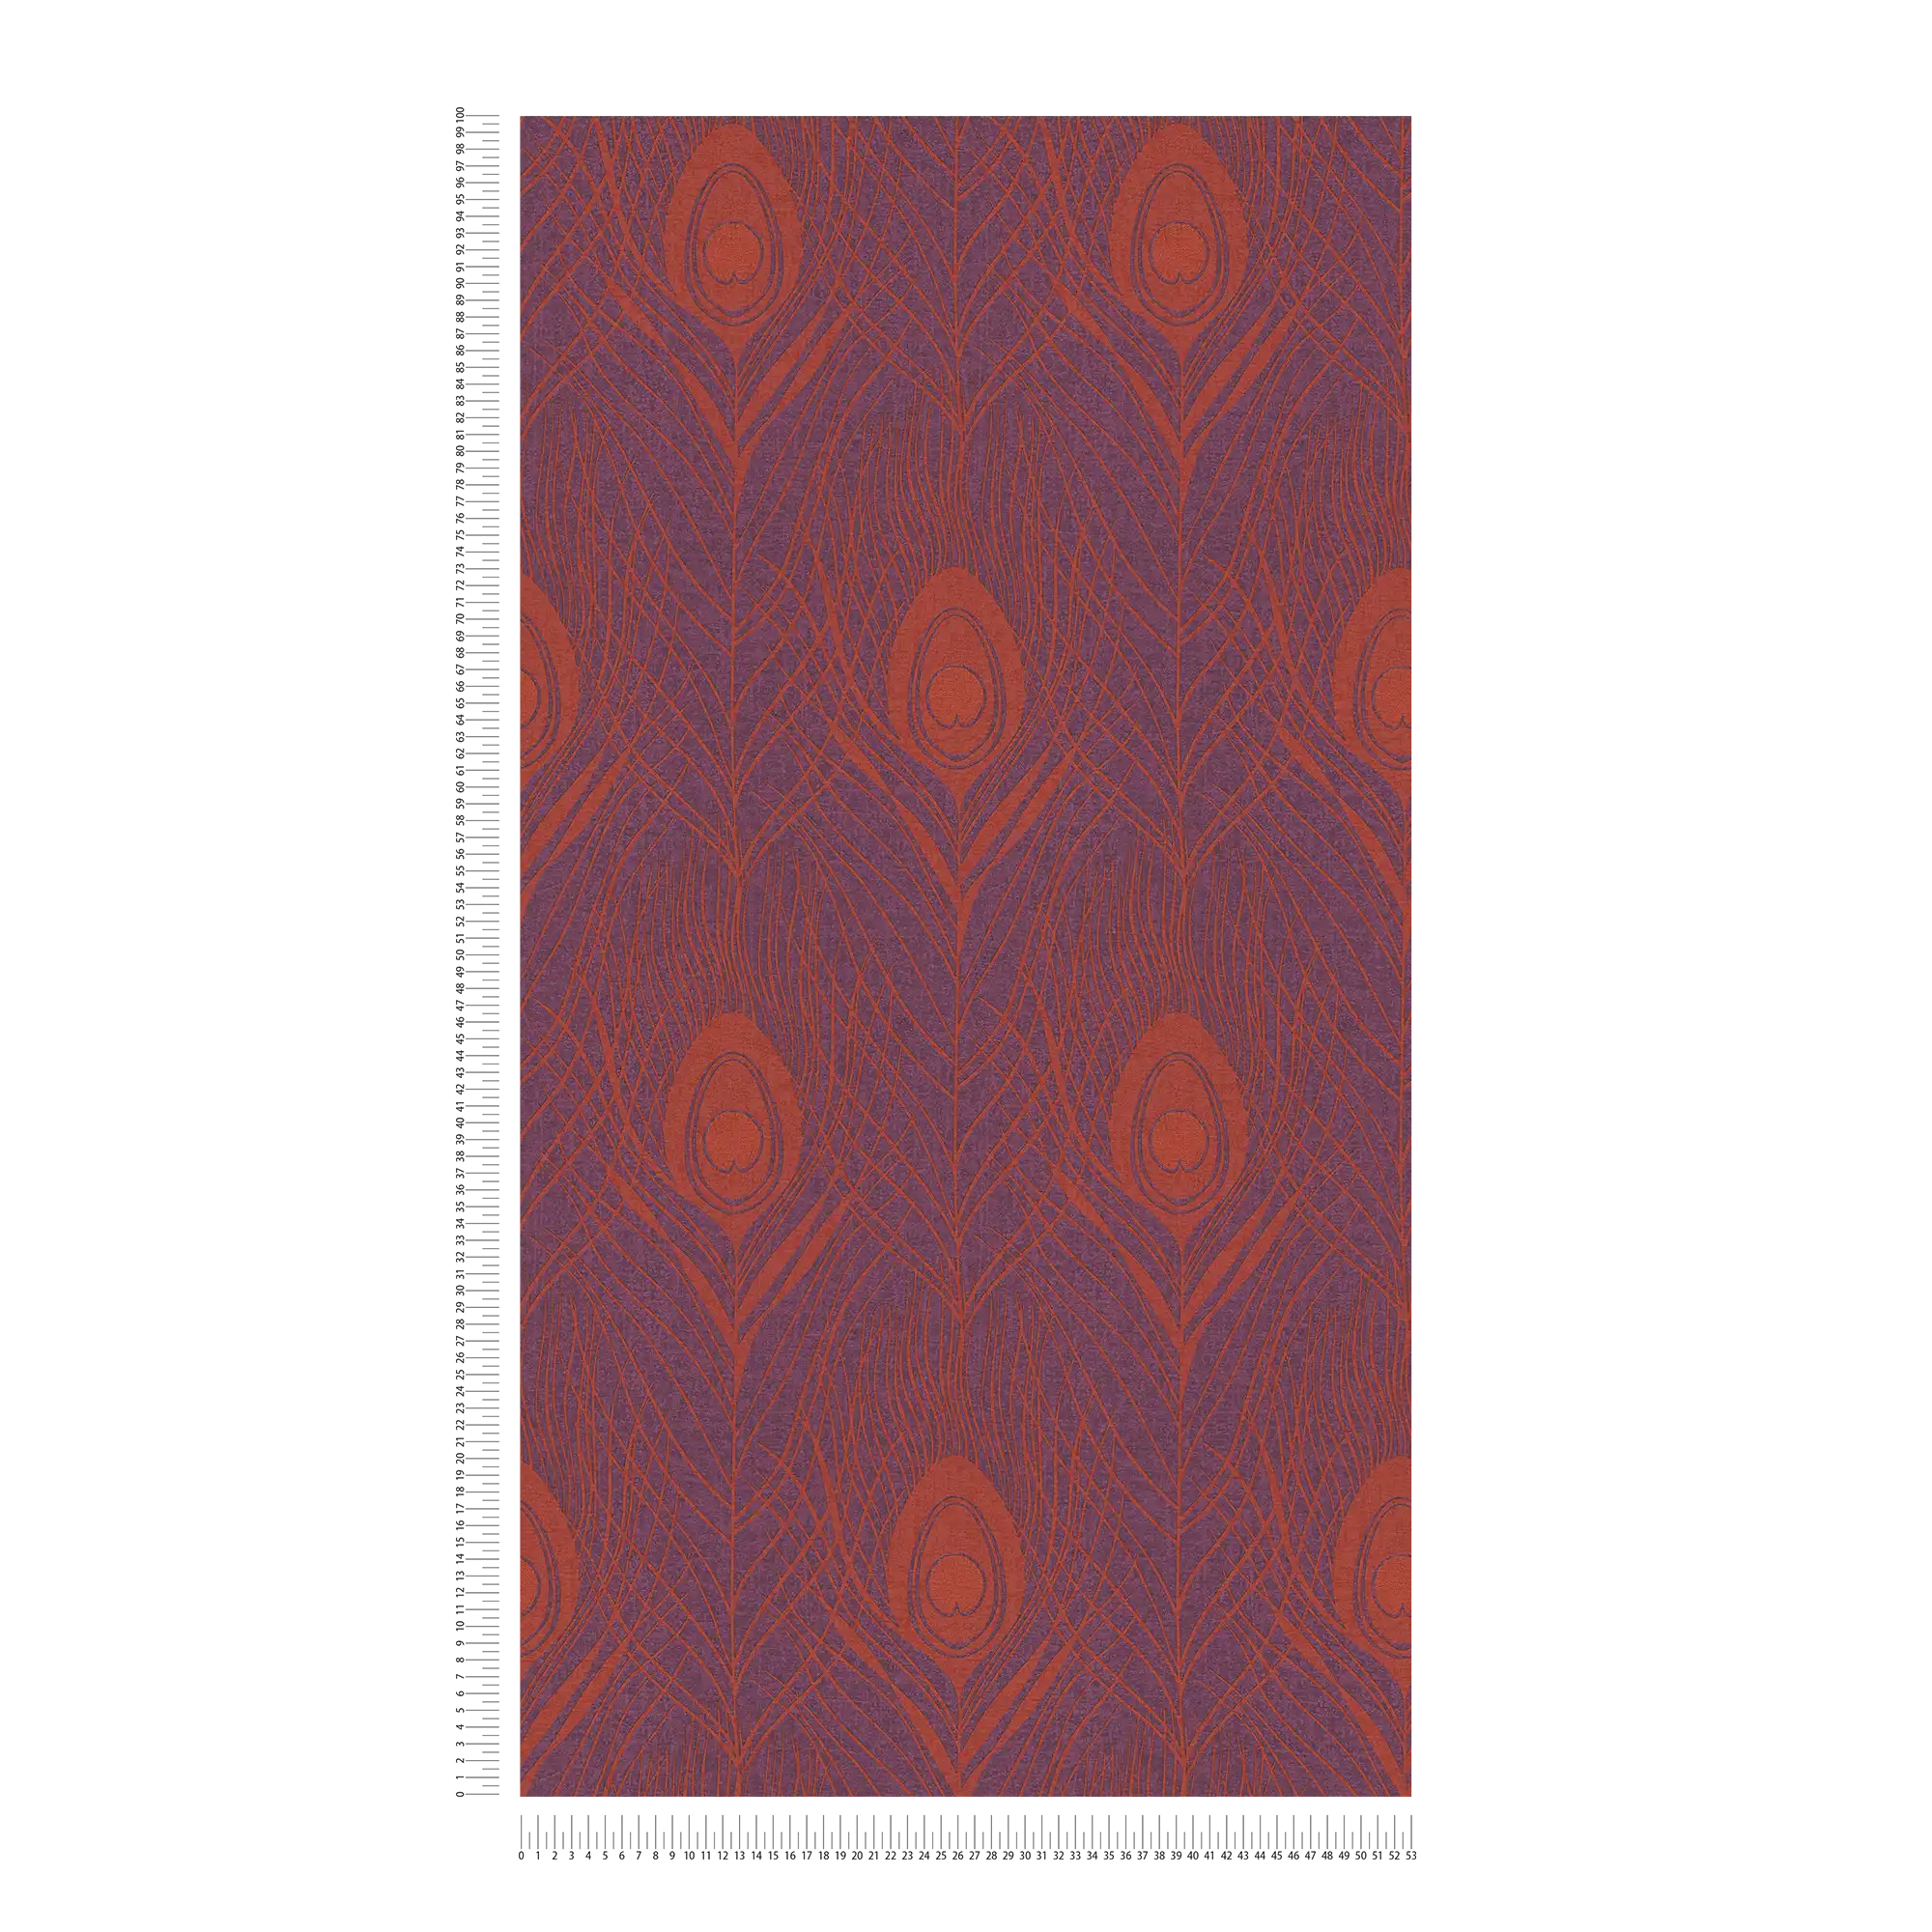             Magenta non-woven wallpaper with peacock feathers - red, purple, gold
        